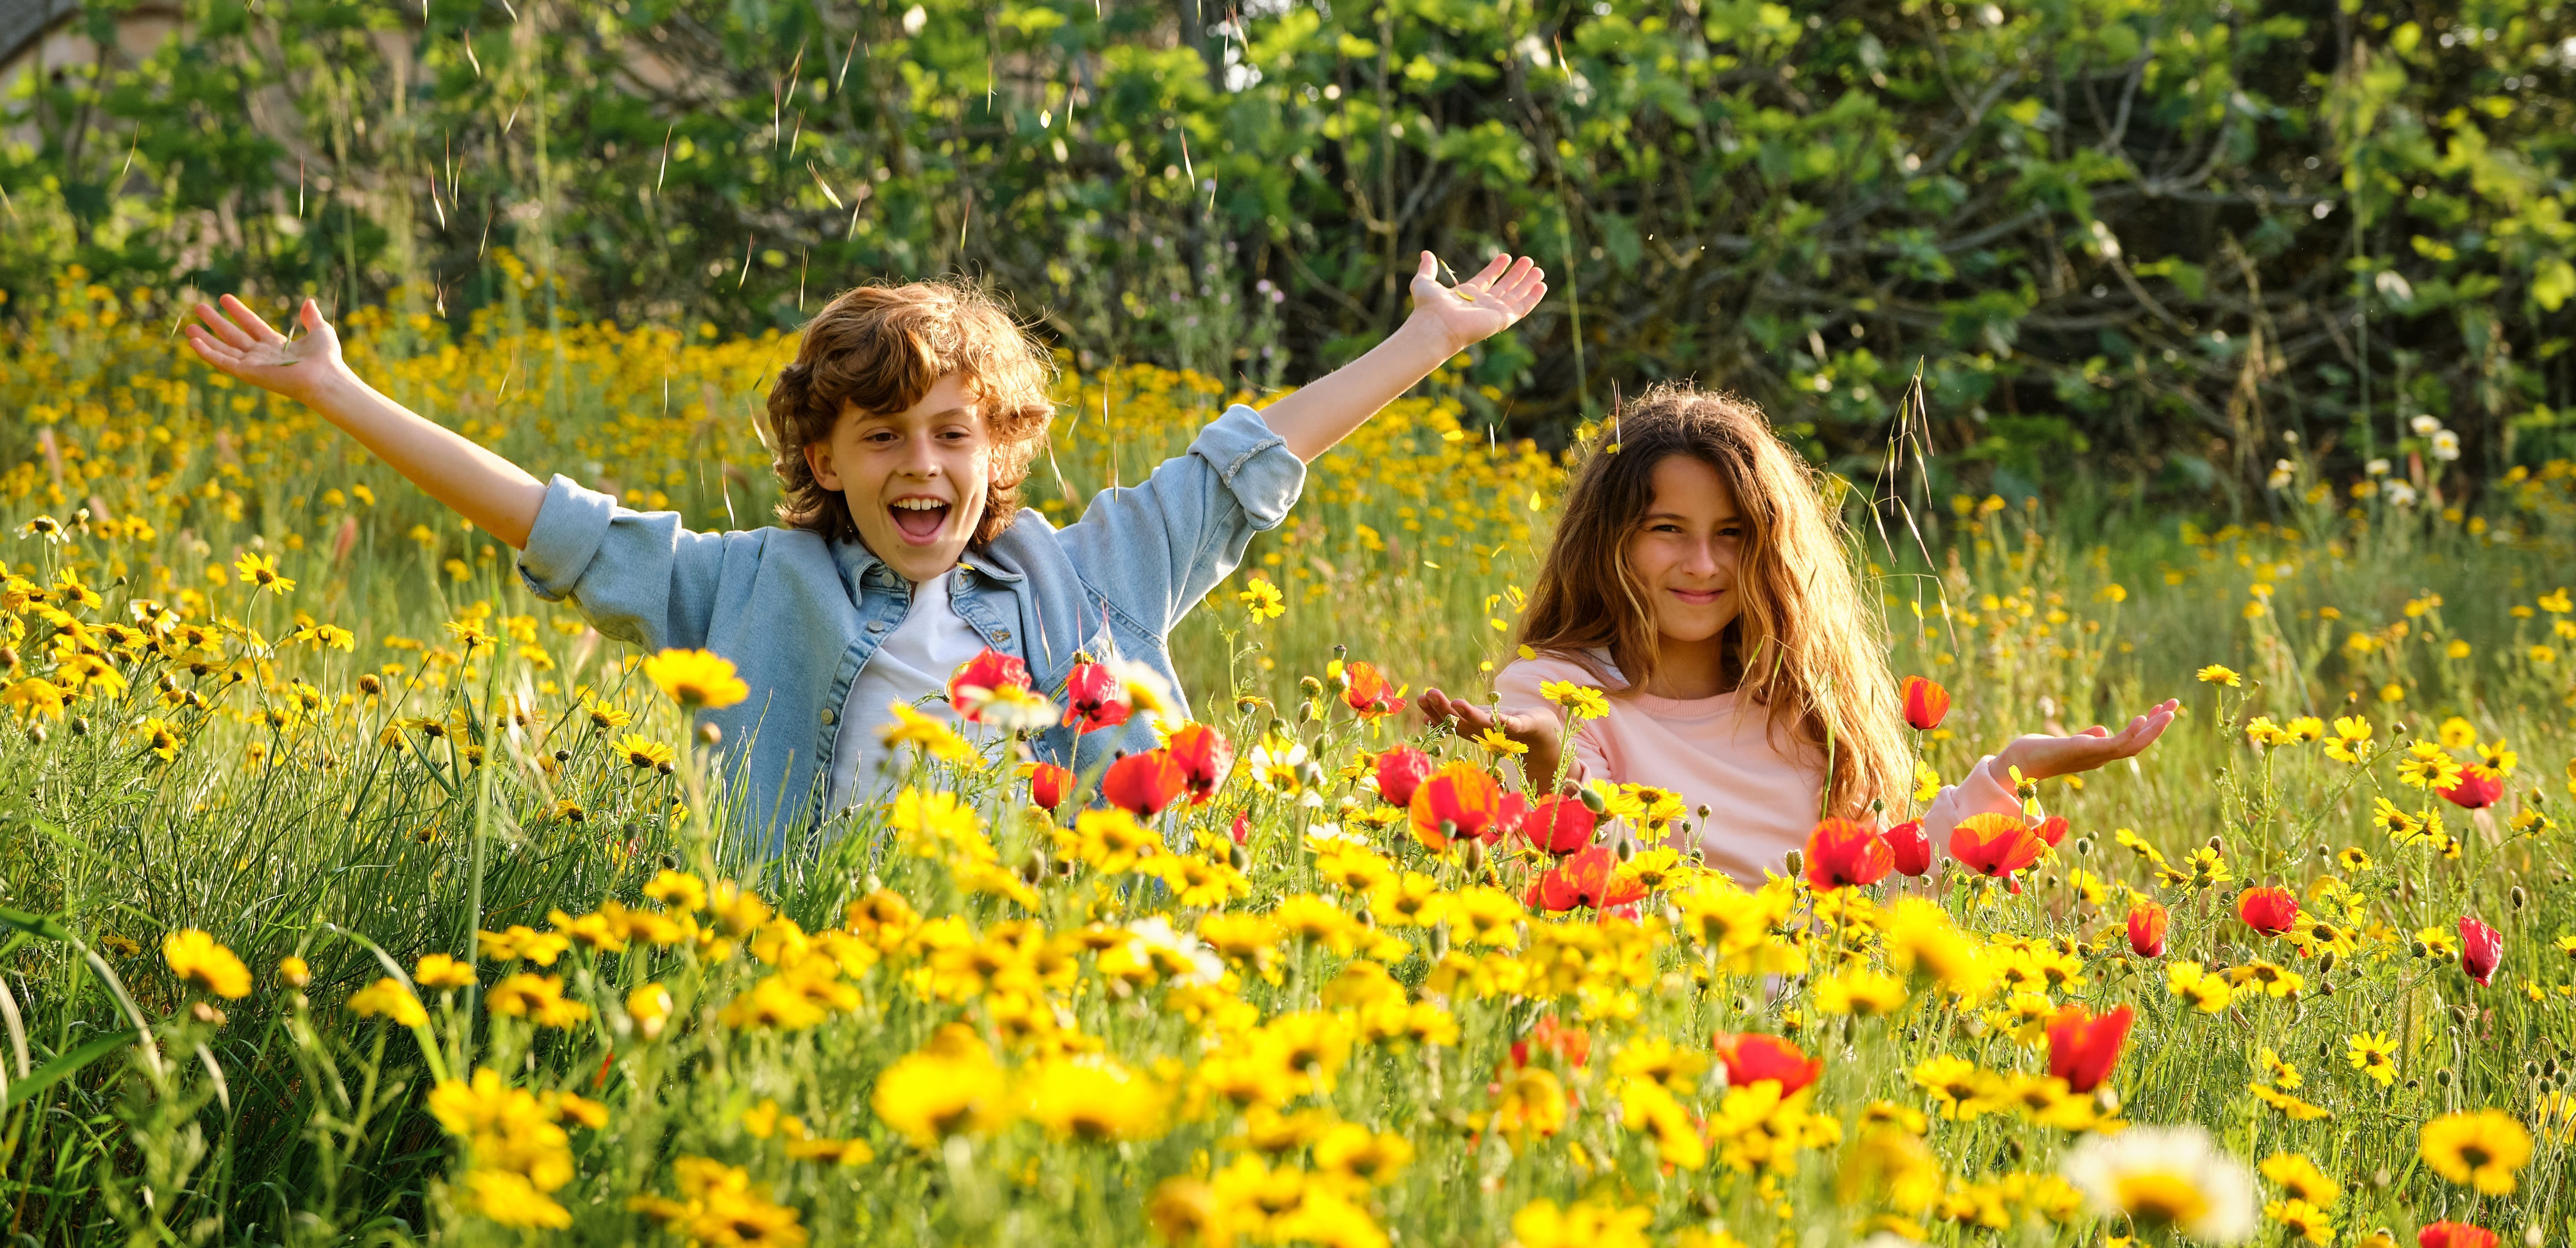 An image of a boy and a girl in a field of flowers.